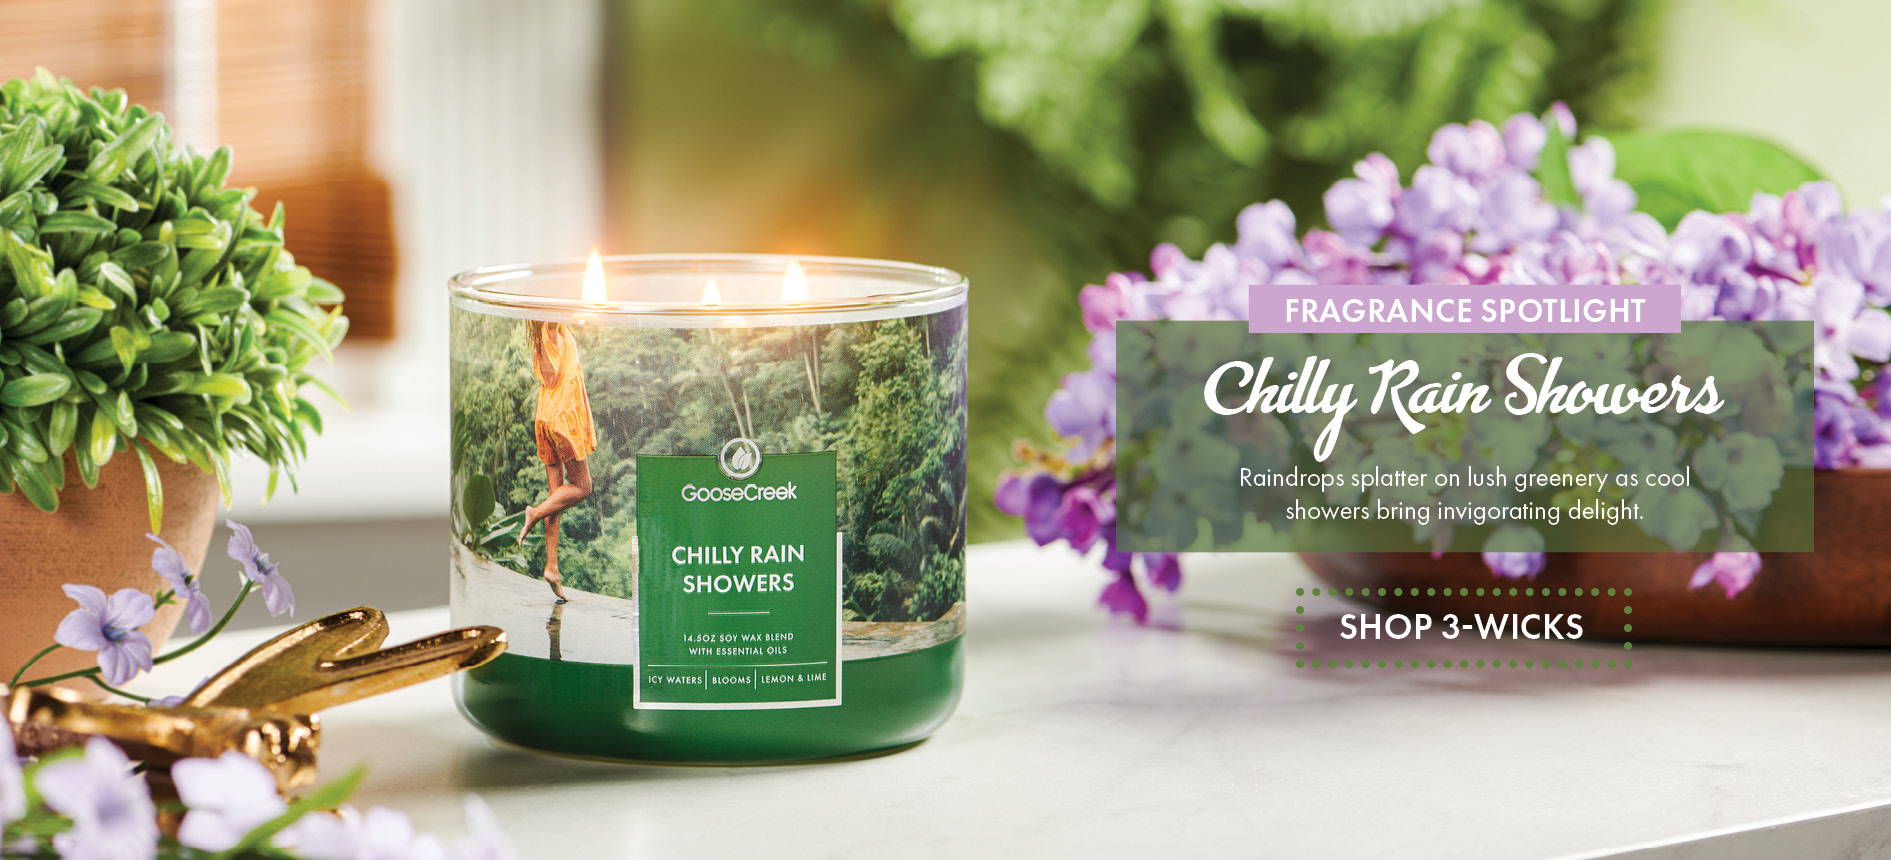 Chilly Rain Showers 3-wick candle